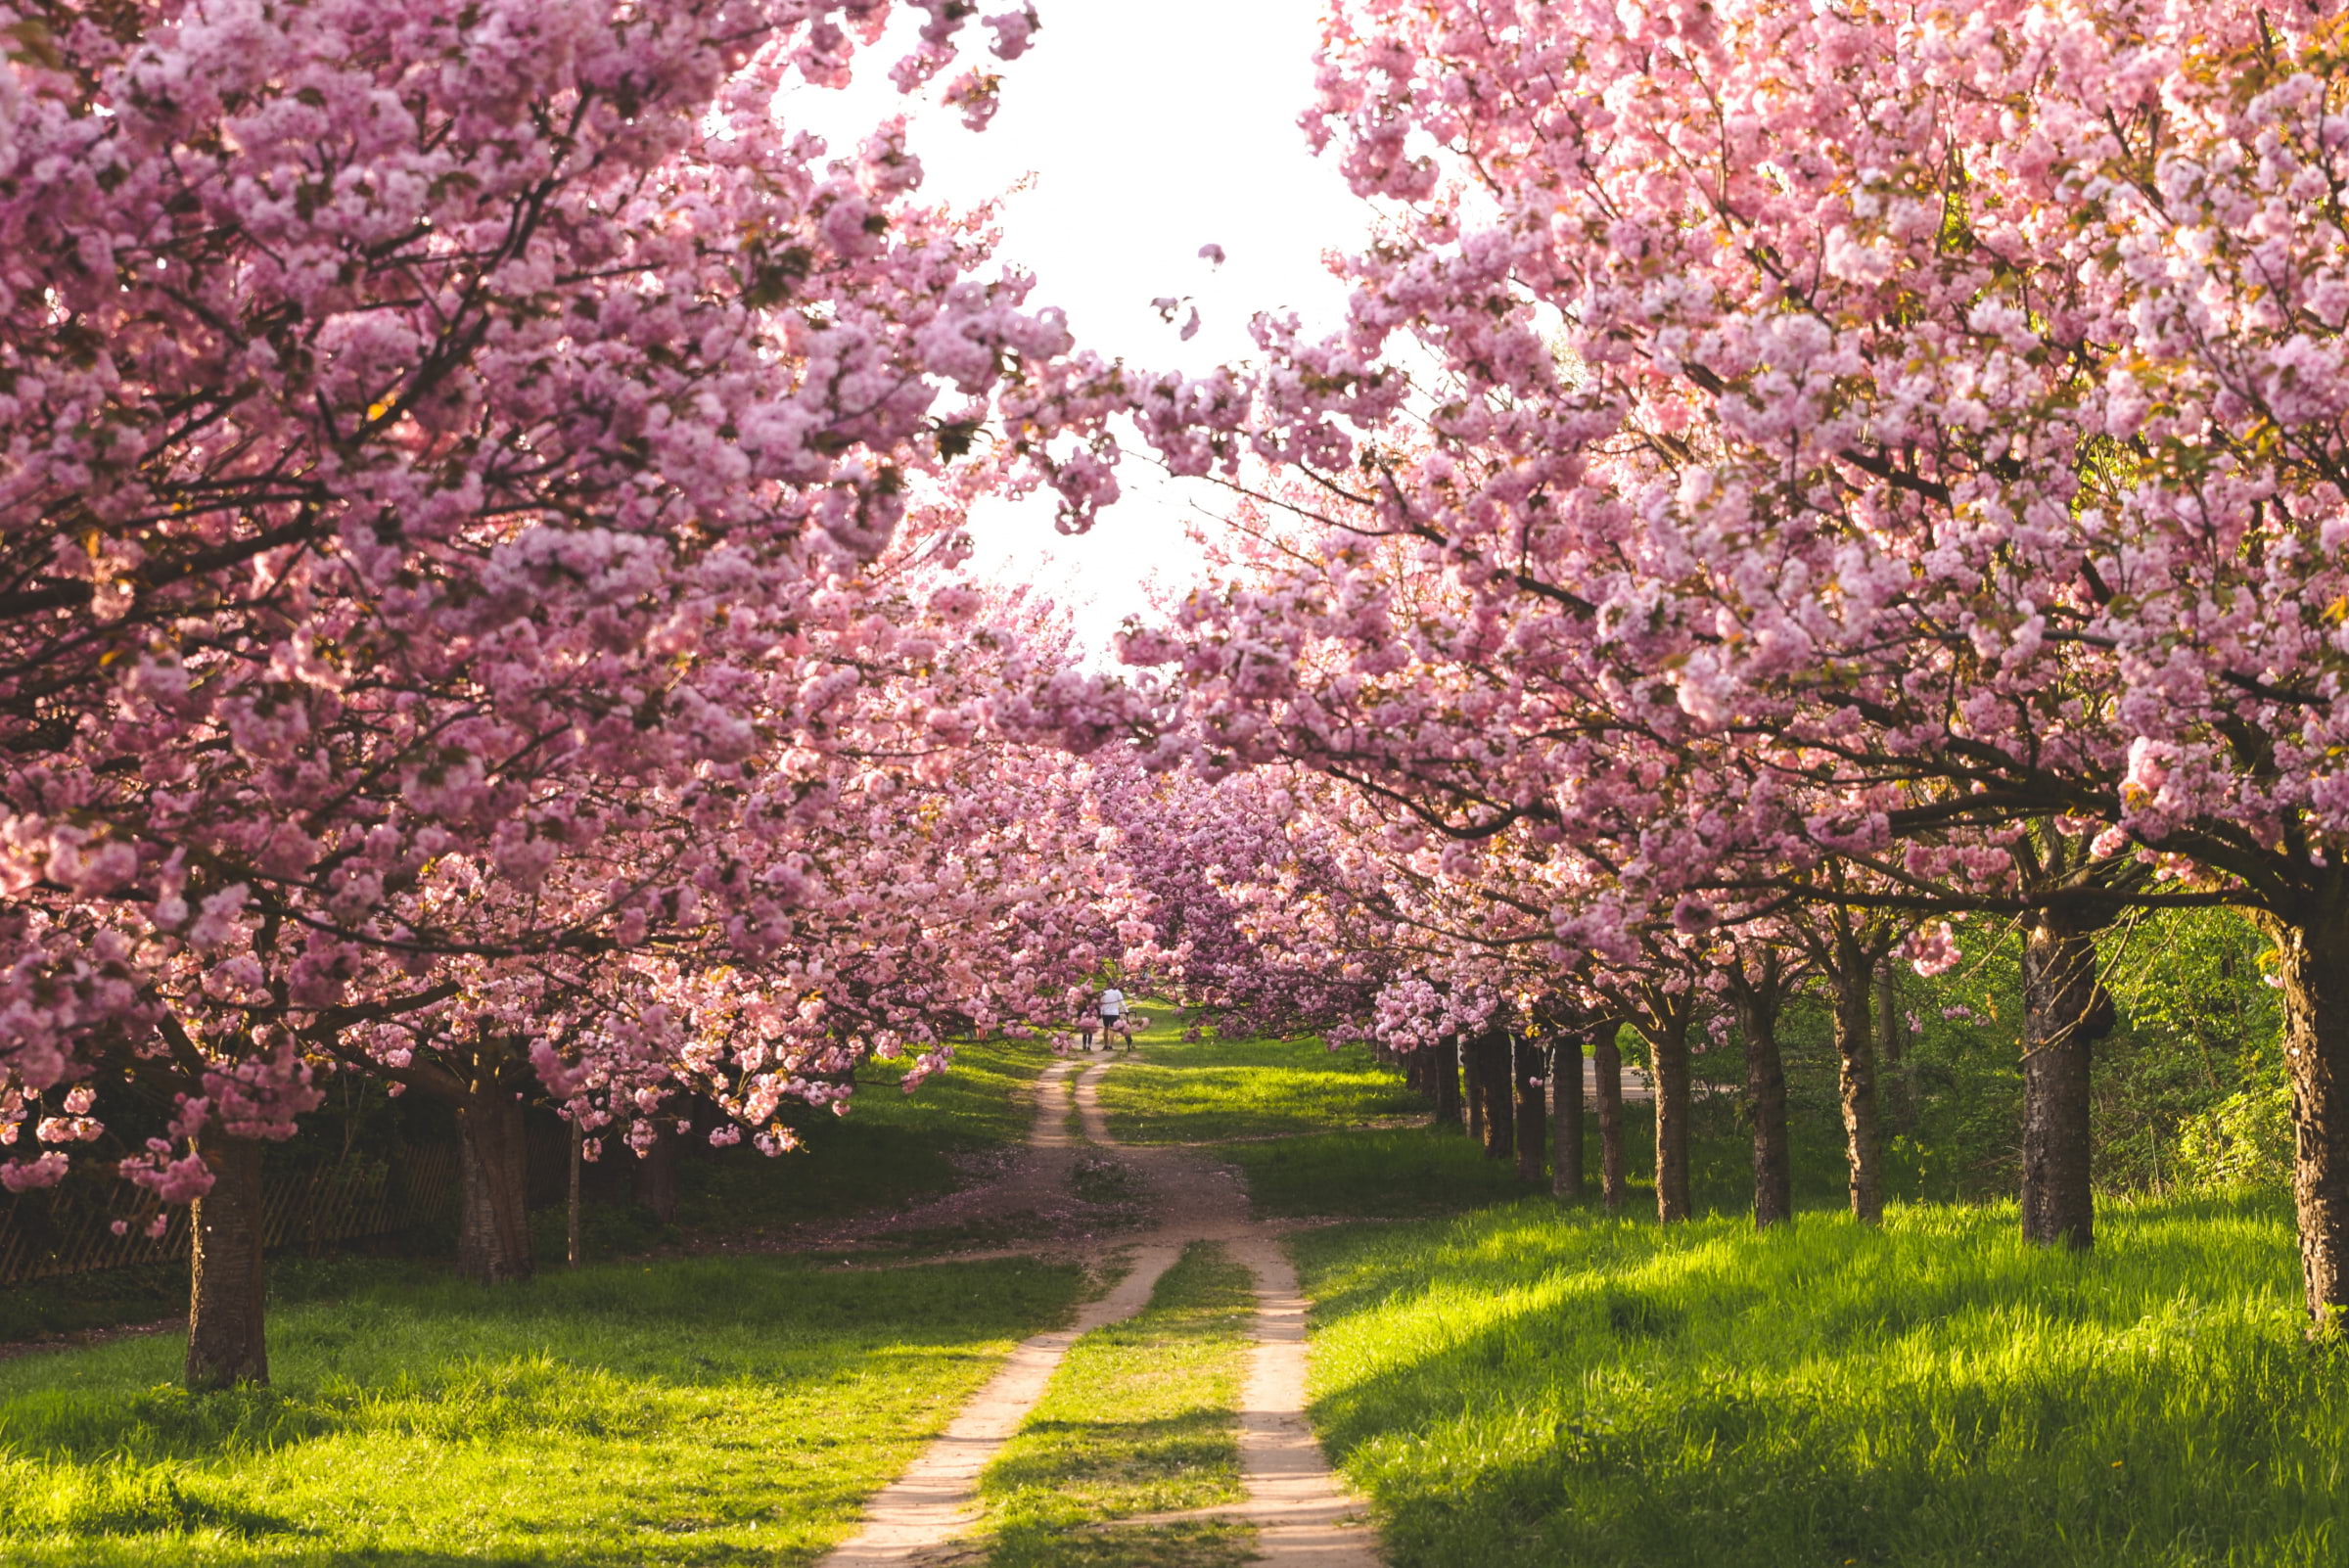 A dirt road flanked with blossoming cherry trees in London.